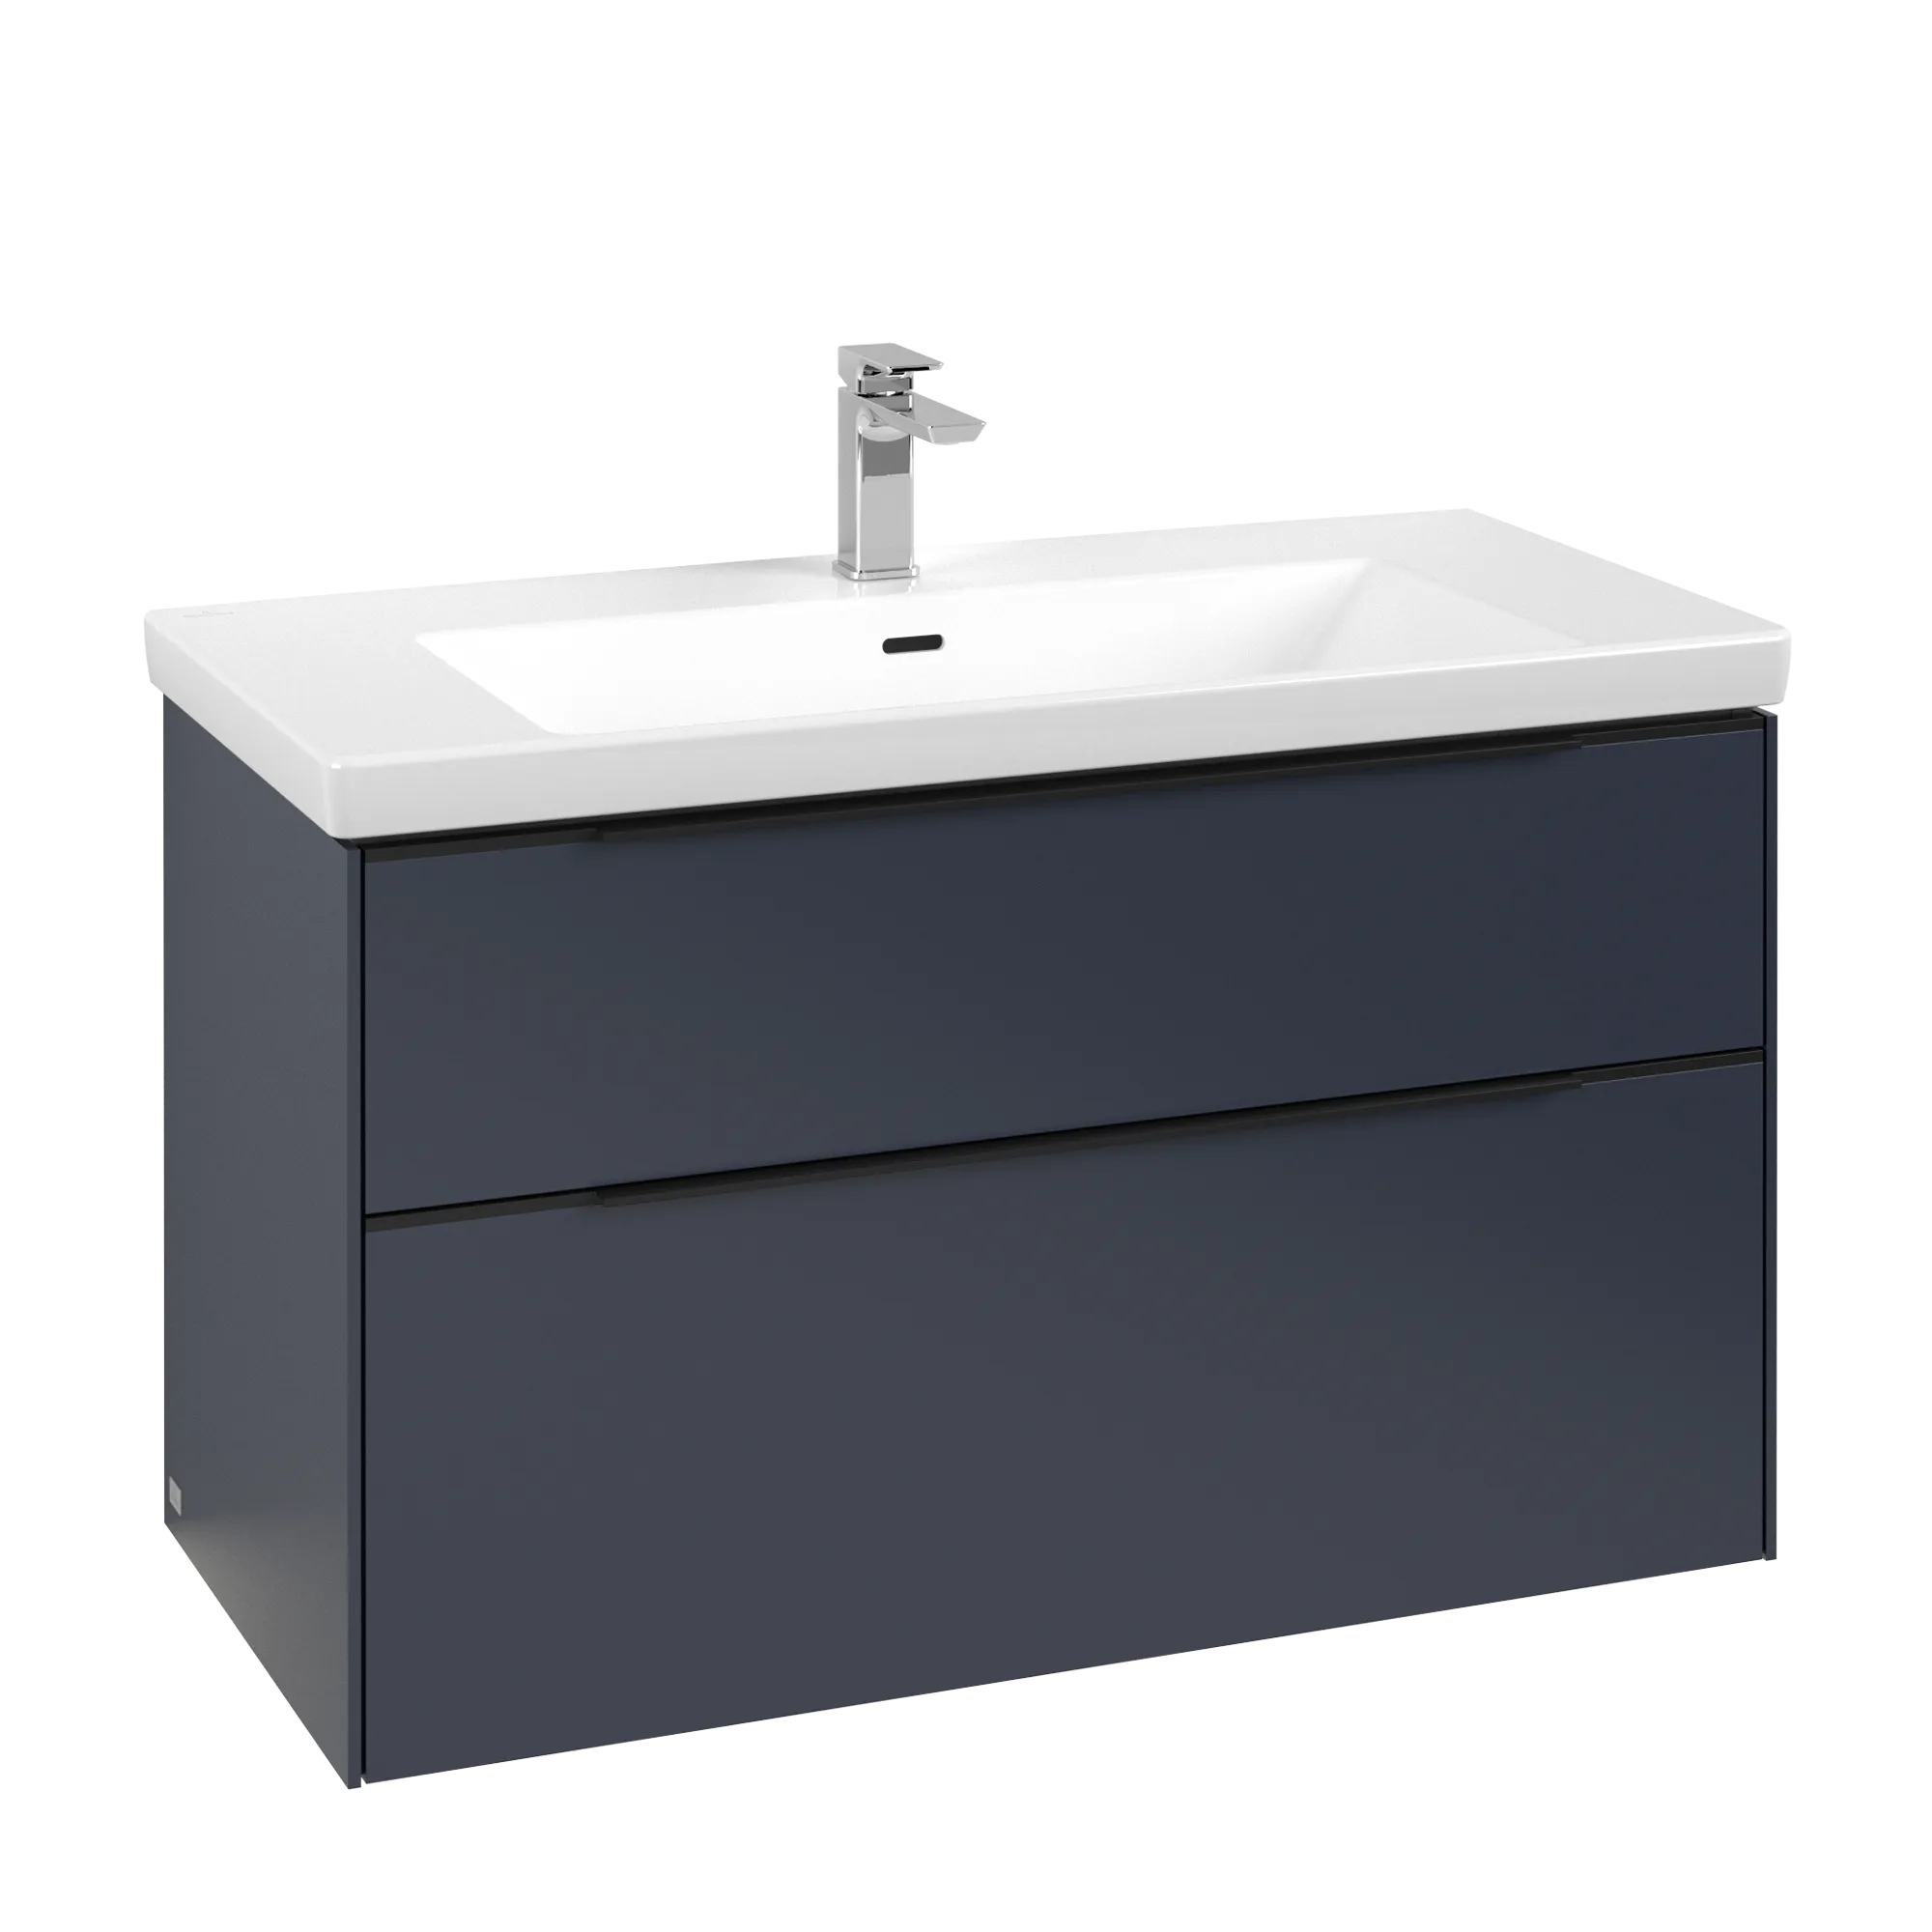 VILLEROY BOCH Subway 3.0 Vanity unit, with lighting, 2 pull-out compartments, 973 x 576 x 478 mm, Marine Blue #C570L1VQ resmi